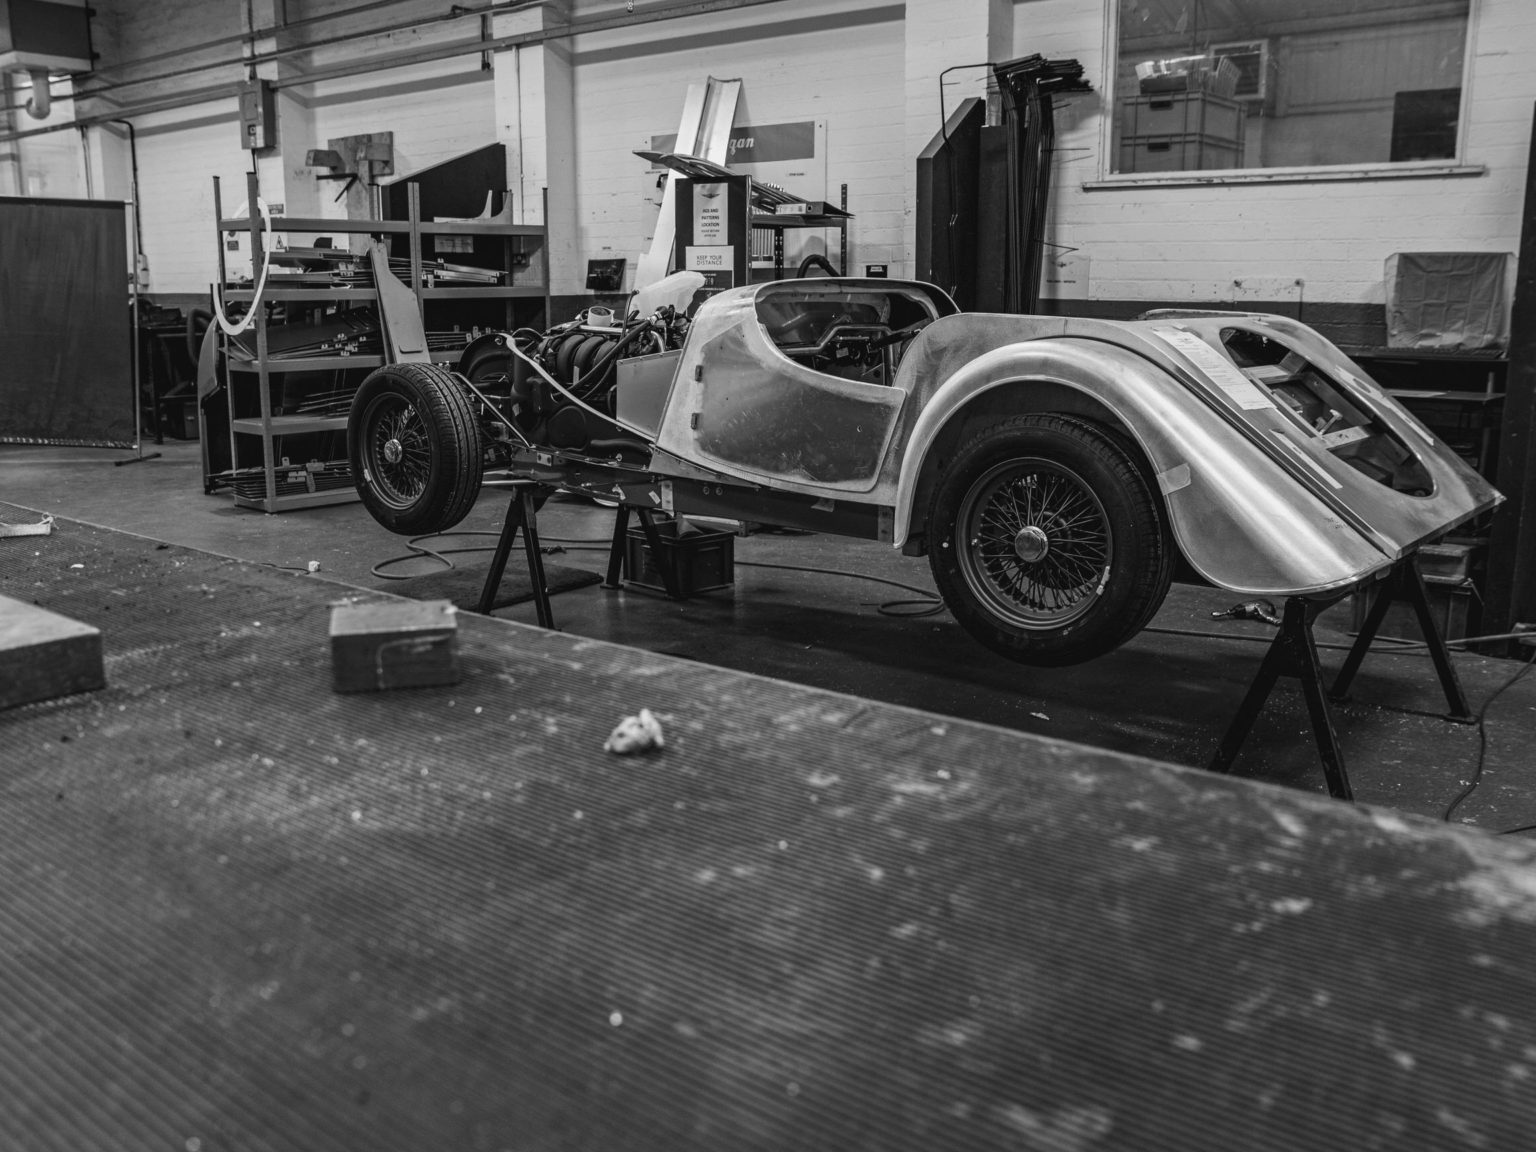 Morgan has said goodbye to the traditional steel chassis as the automaker prepares to enter a new design and engineering era.